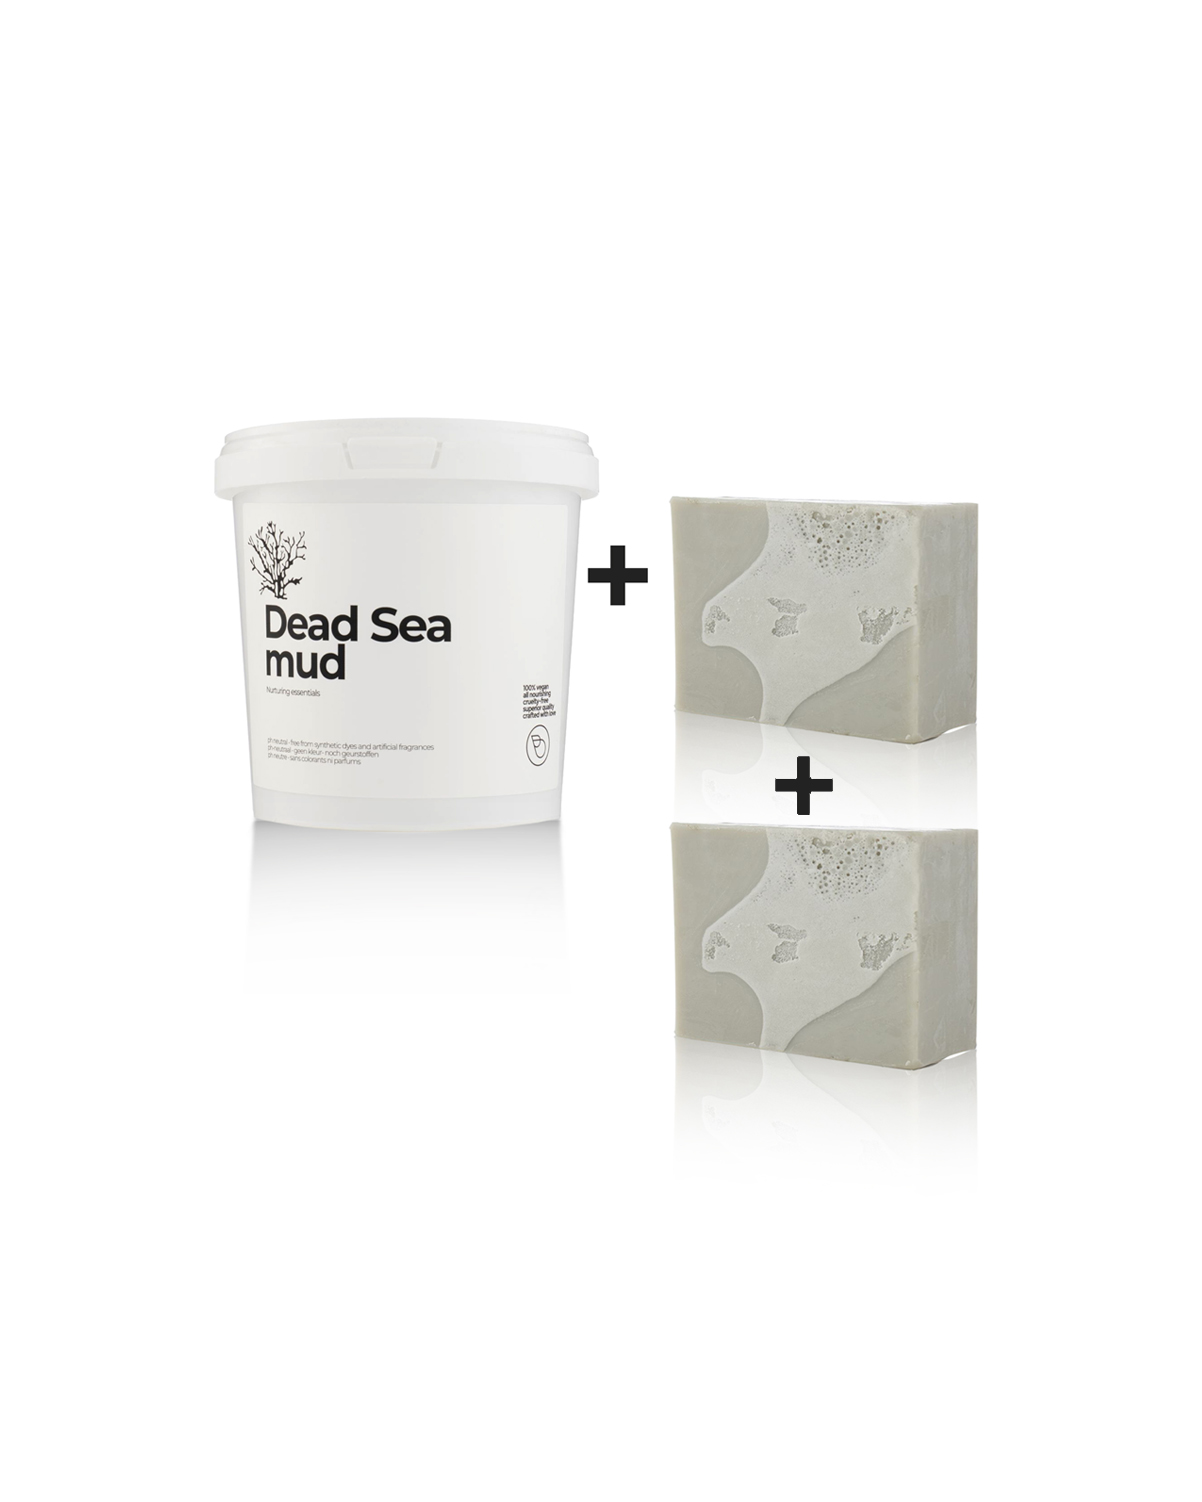 TEMPORARY COMBO PACKAGE DEAD SEA MUD AND 2 DEAD SEA MUD SOAPS

